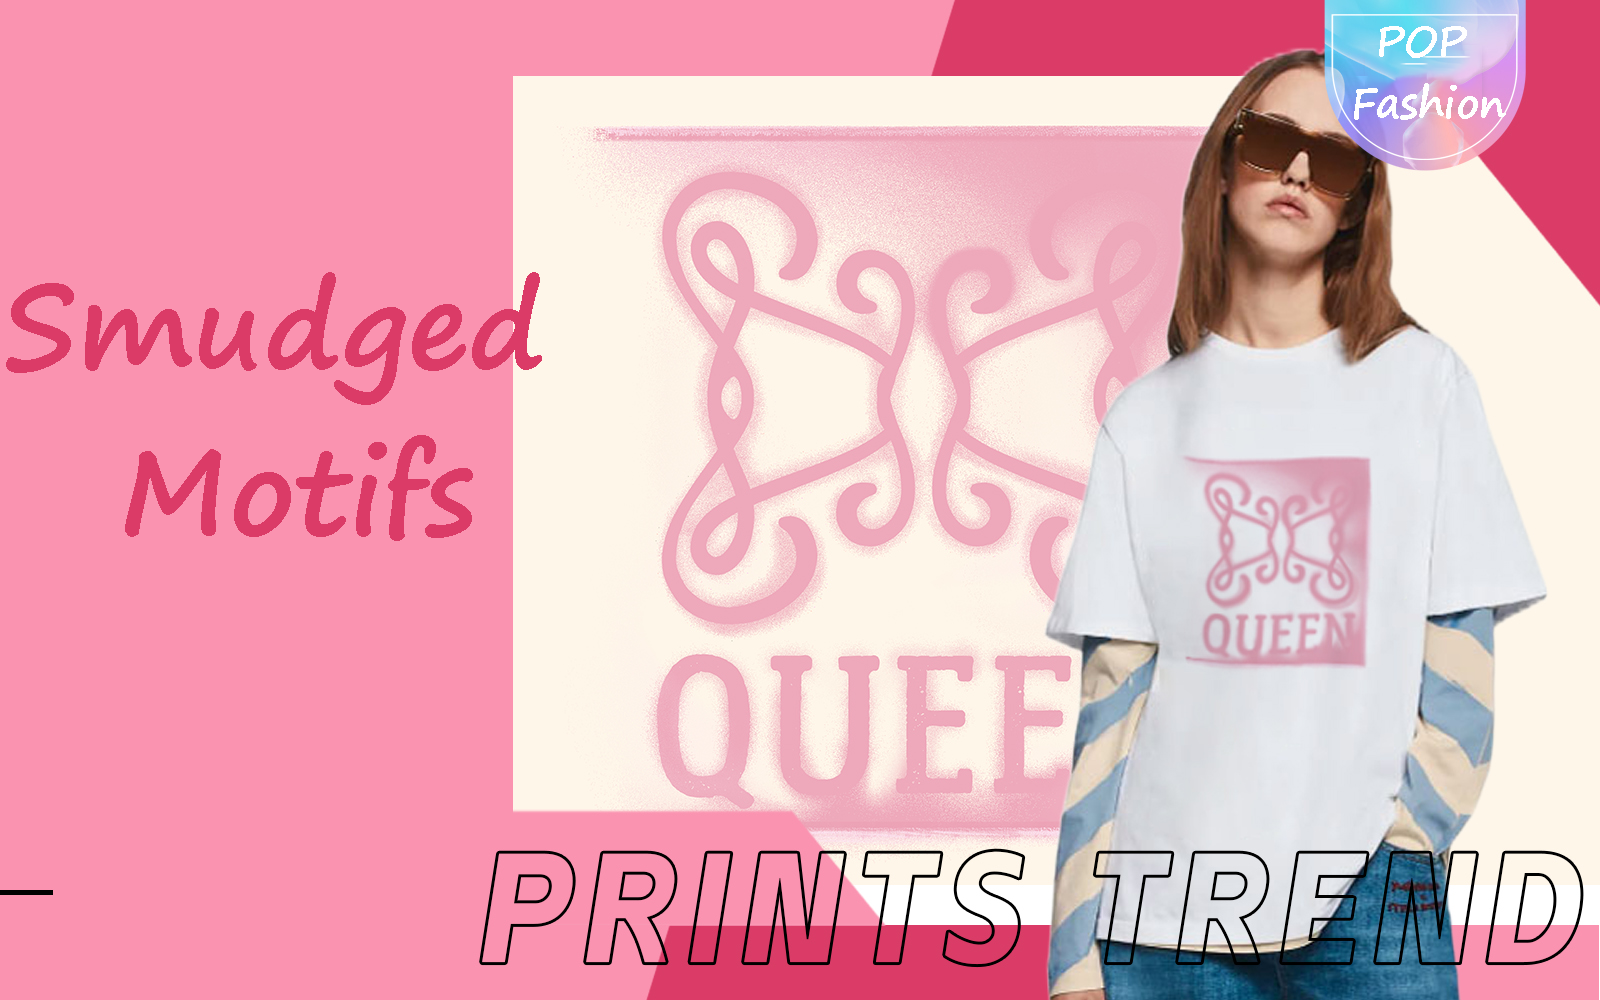 Smudged Motifs -- The Pattern Trend for Women's T-shirt